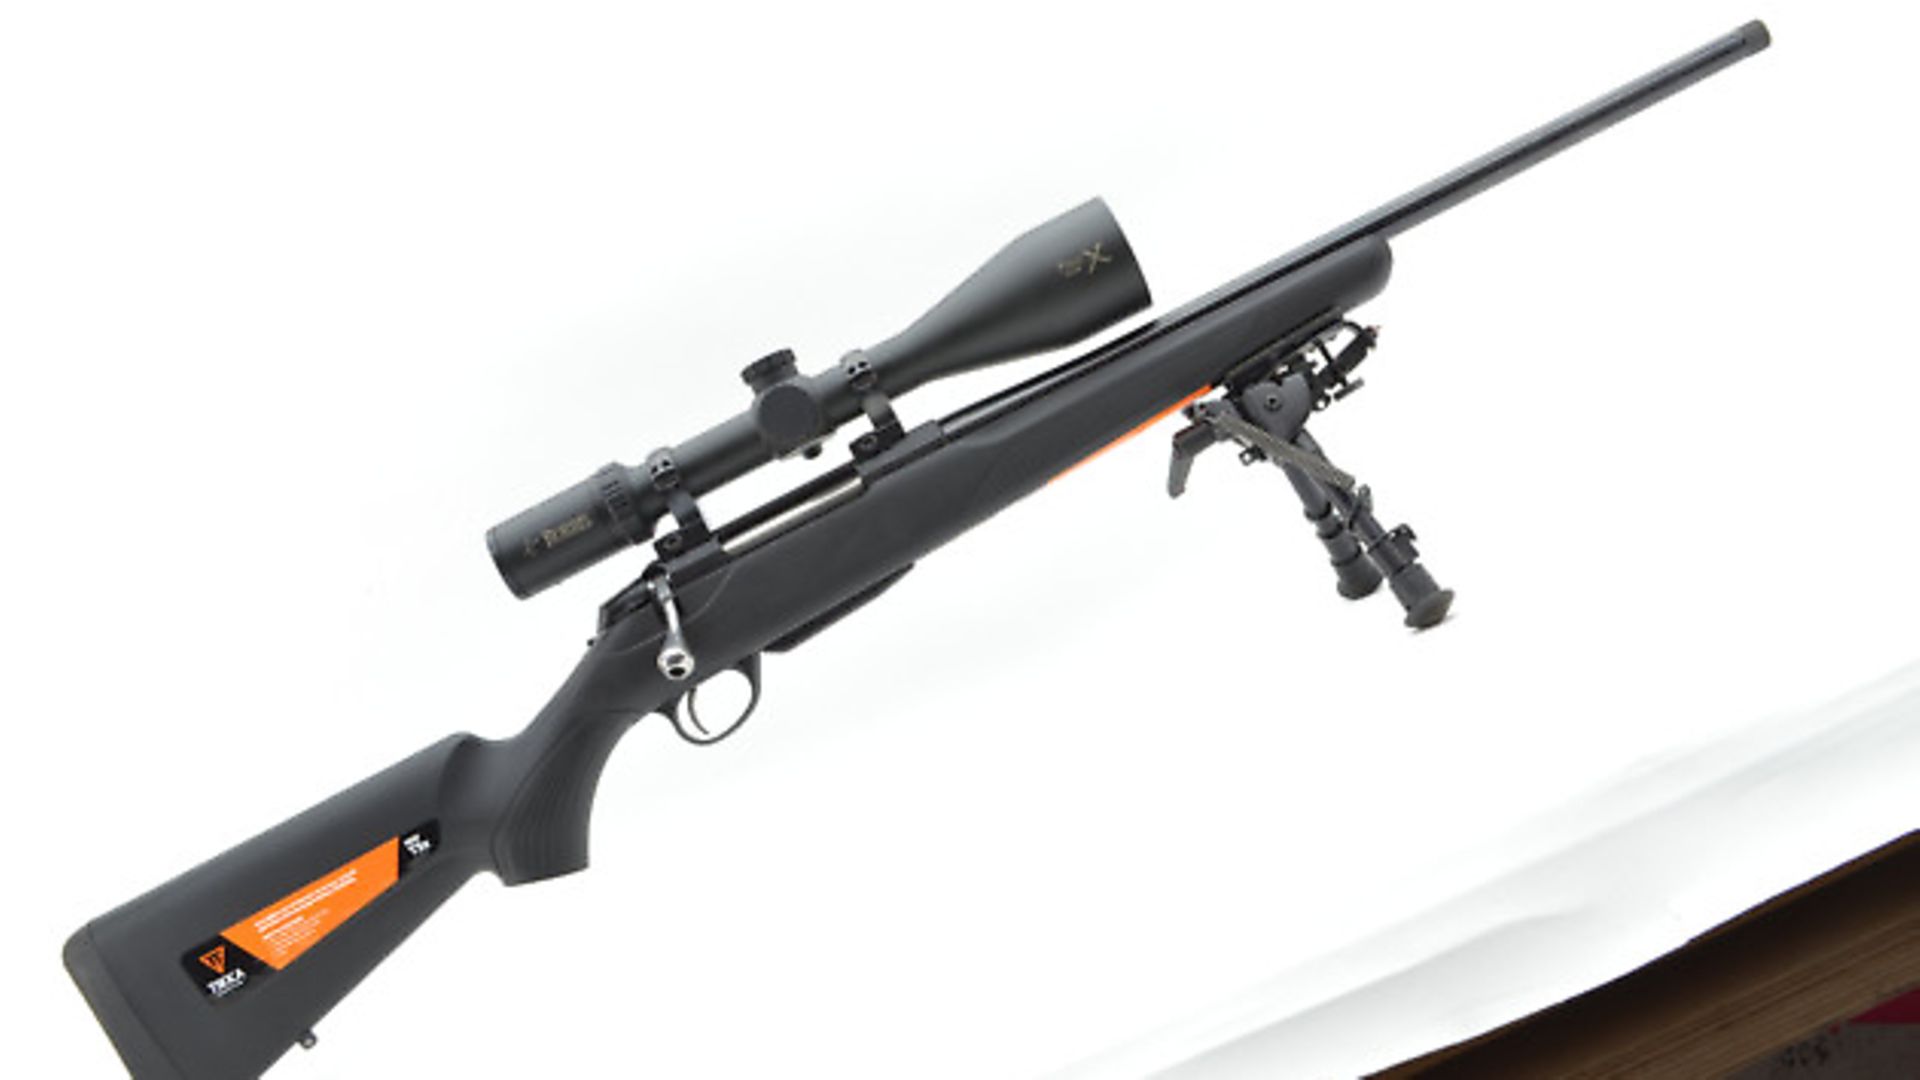 Tikka T3x Lite in 223 Rem - in depth rifle review